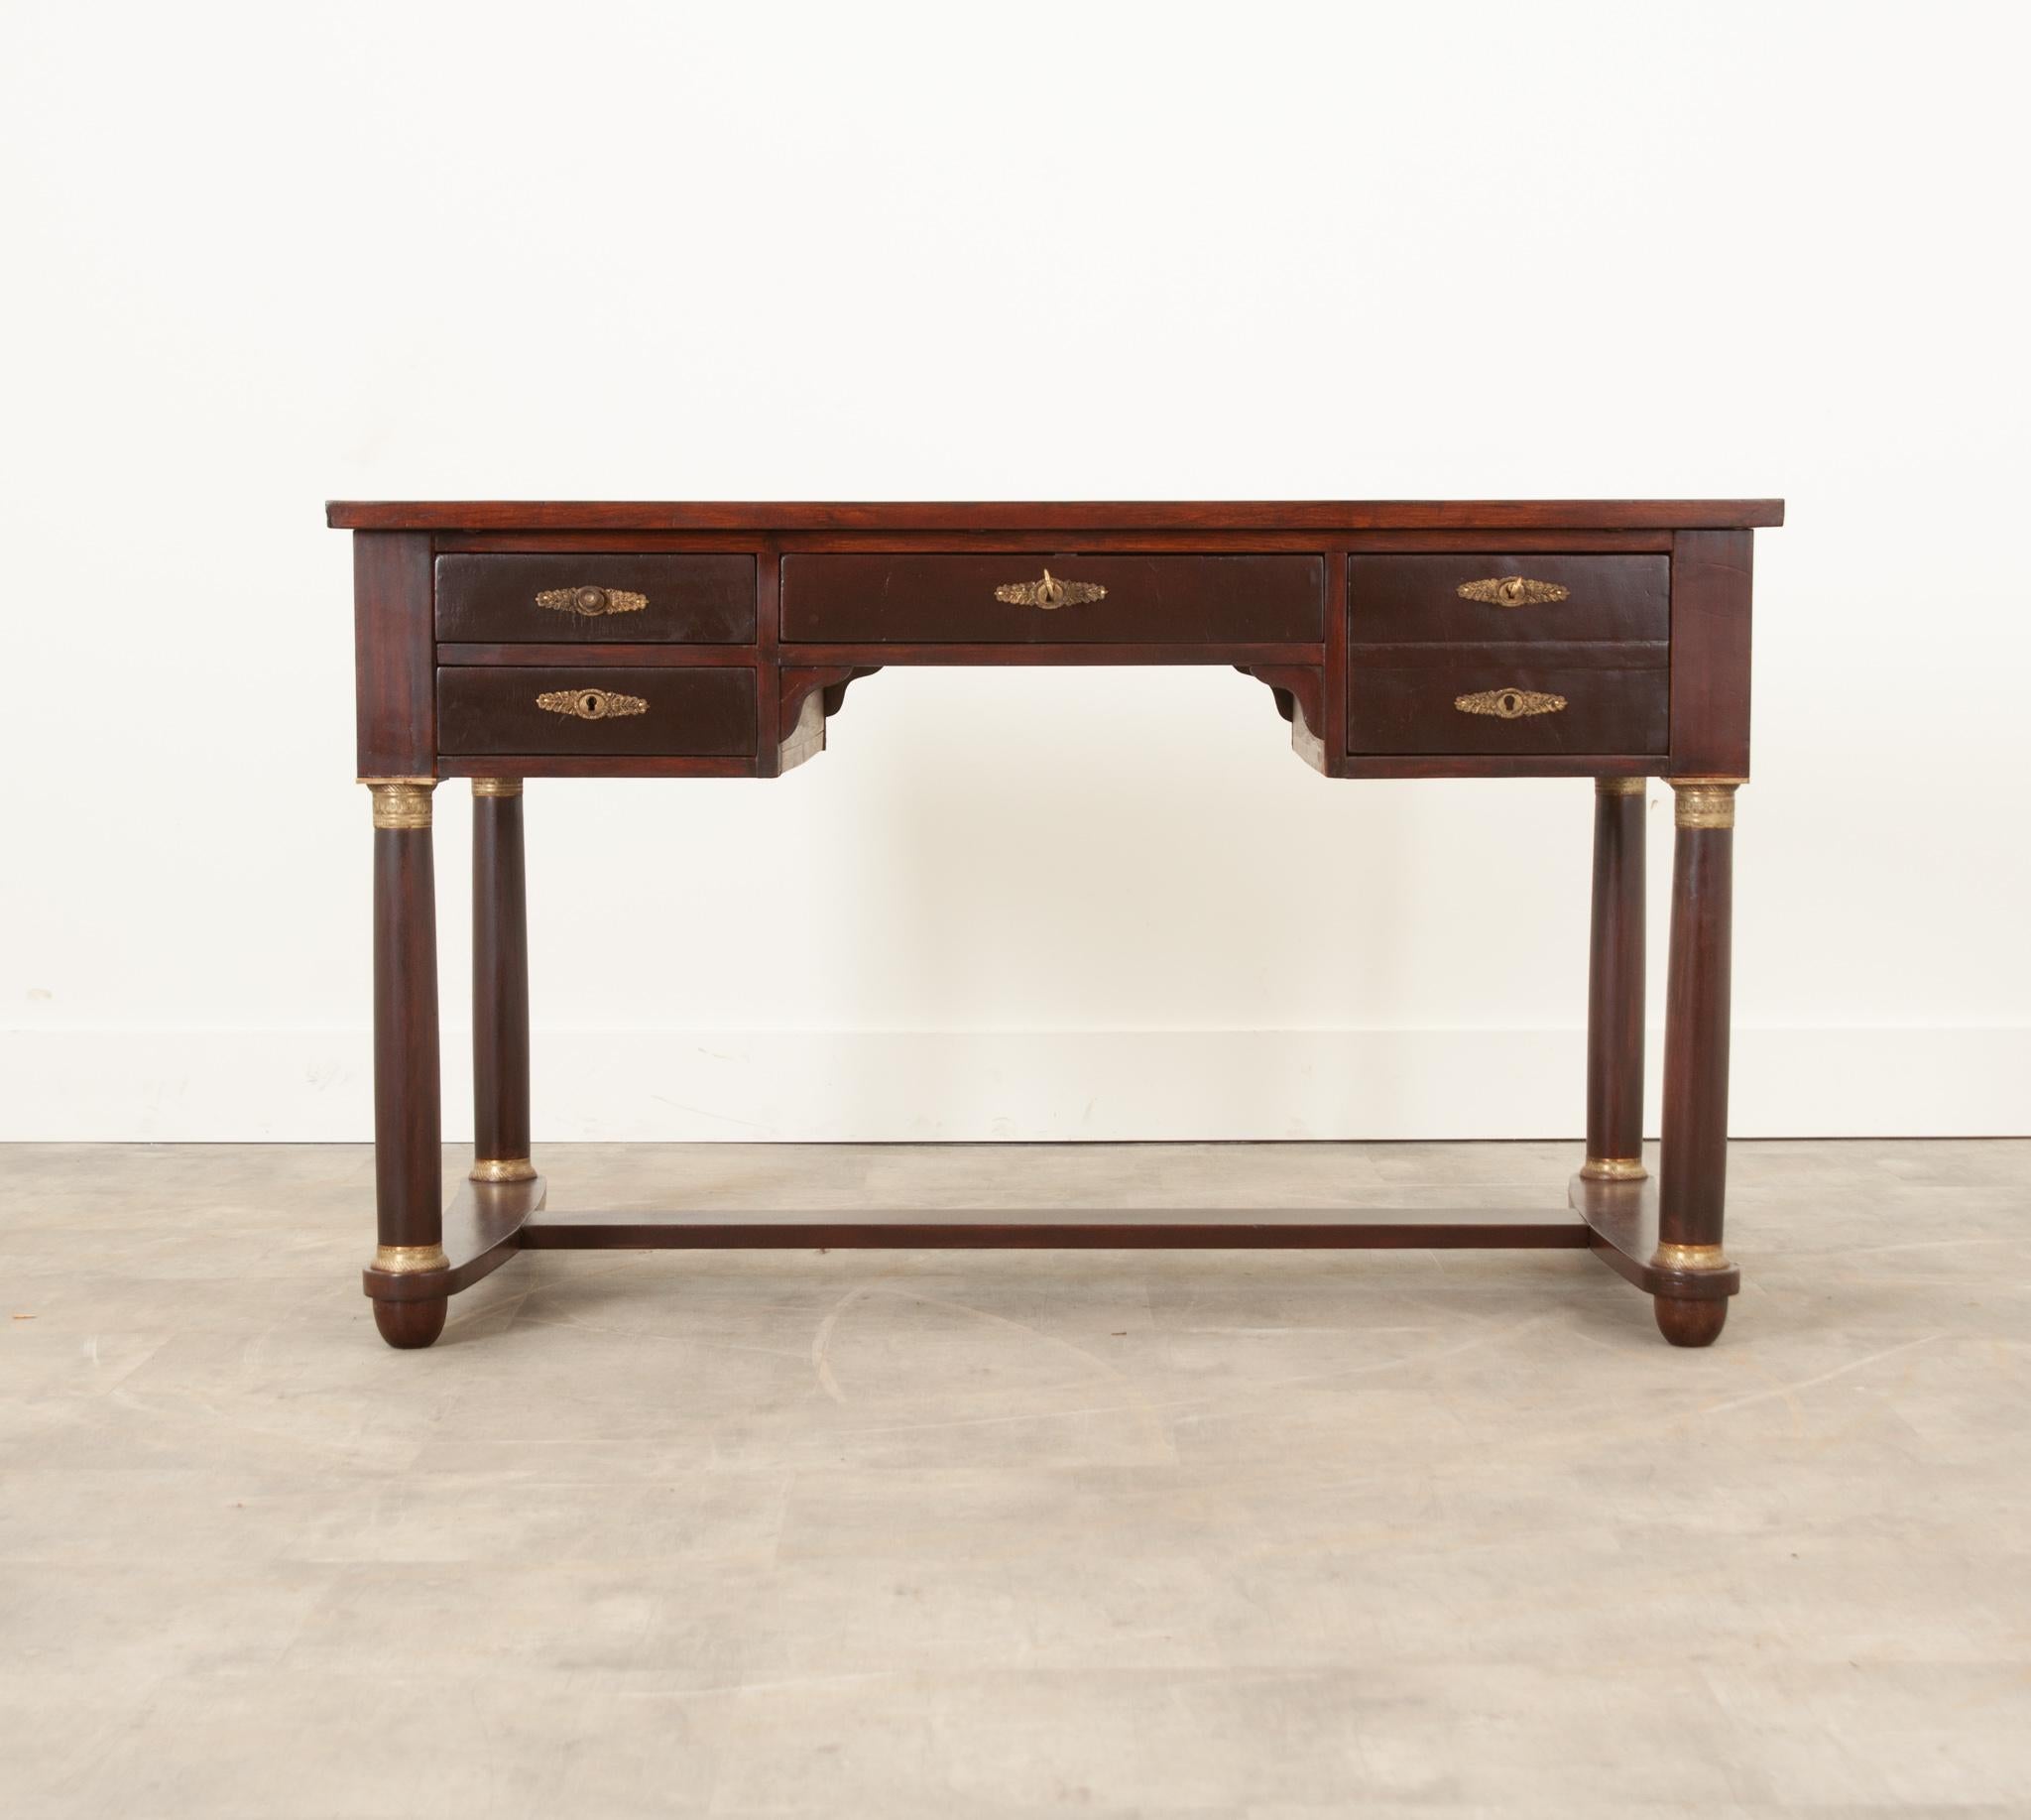 Emanate professionality from behind this stunning Empire-style mahogany desk, made in France during the 1800’s. The desk is topped in beautifully tooled worn gold leather. The desk’s work surface can be enlarged with a pull of either slide that is